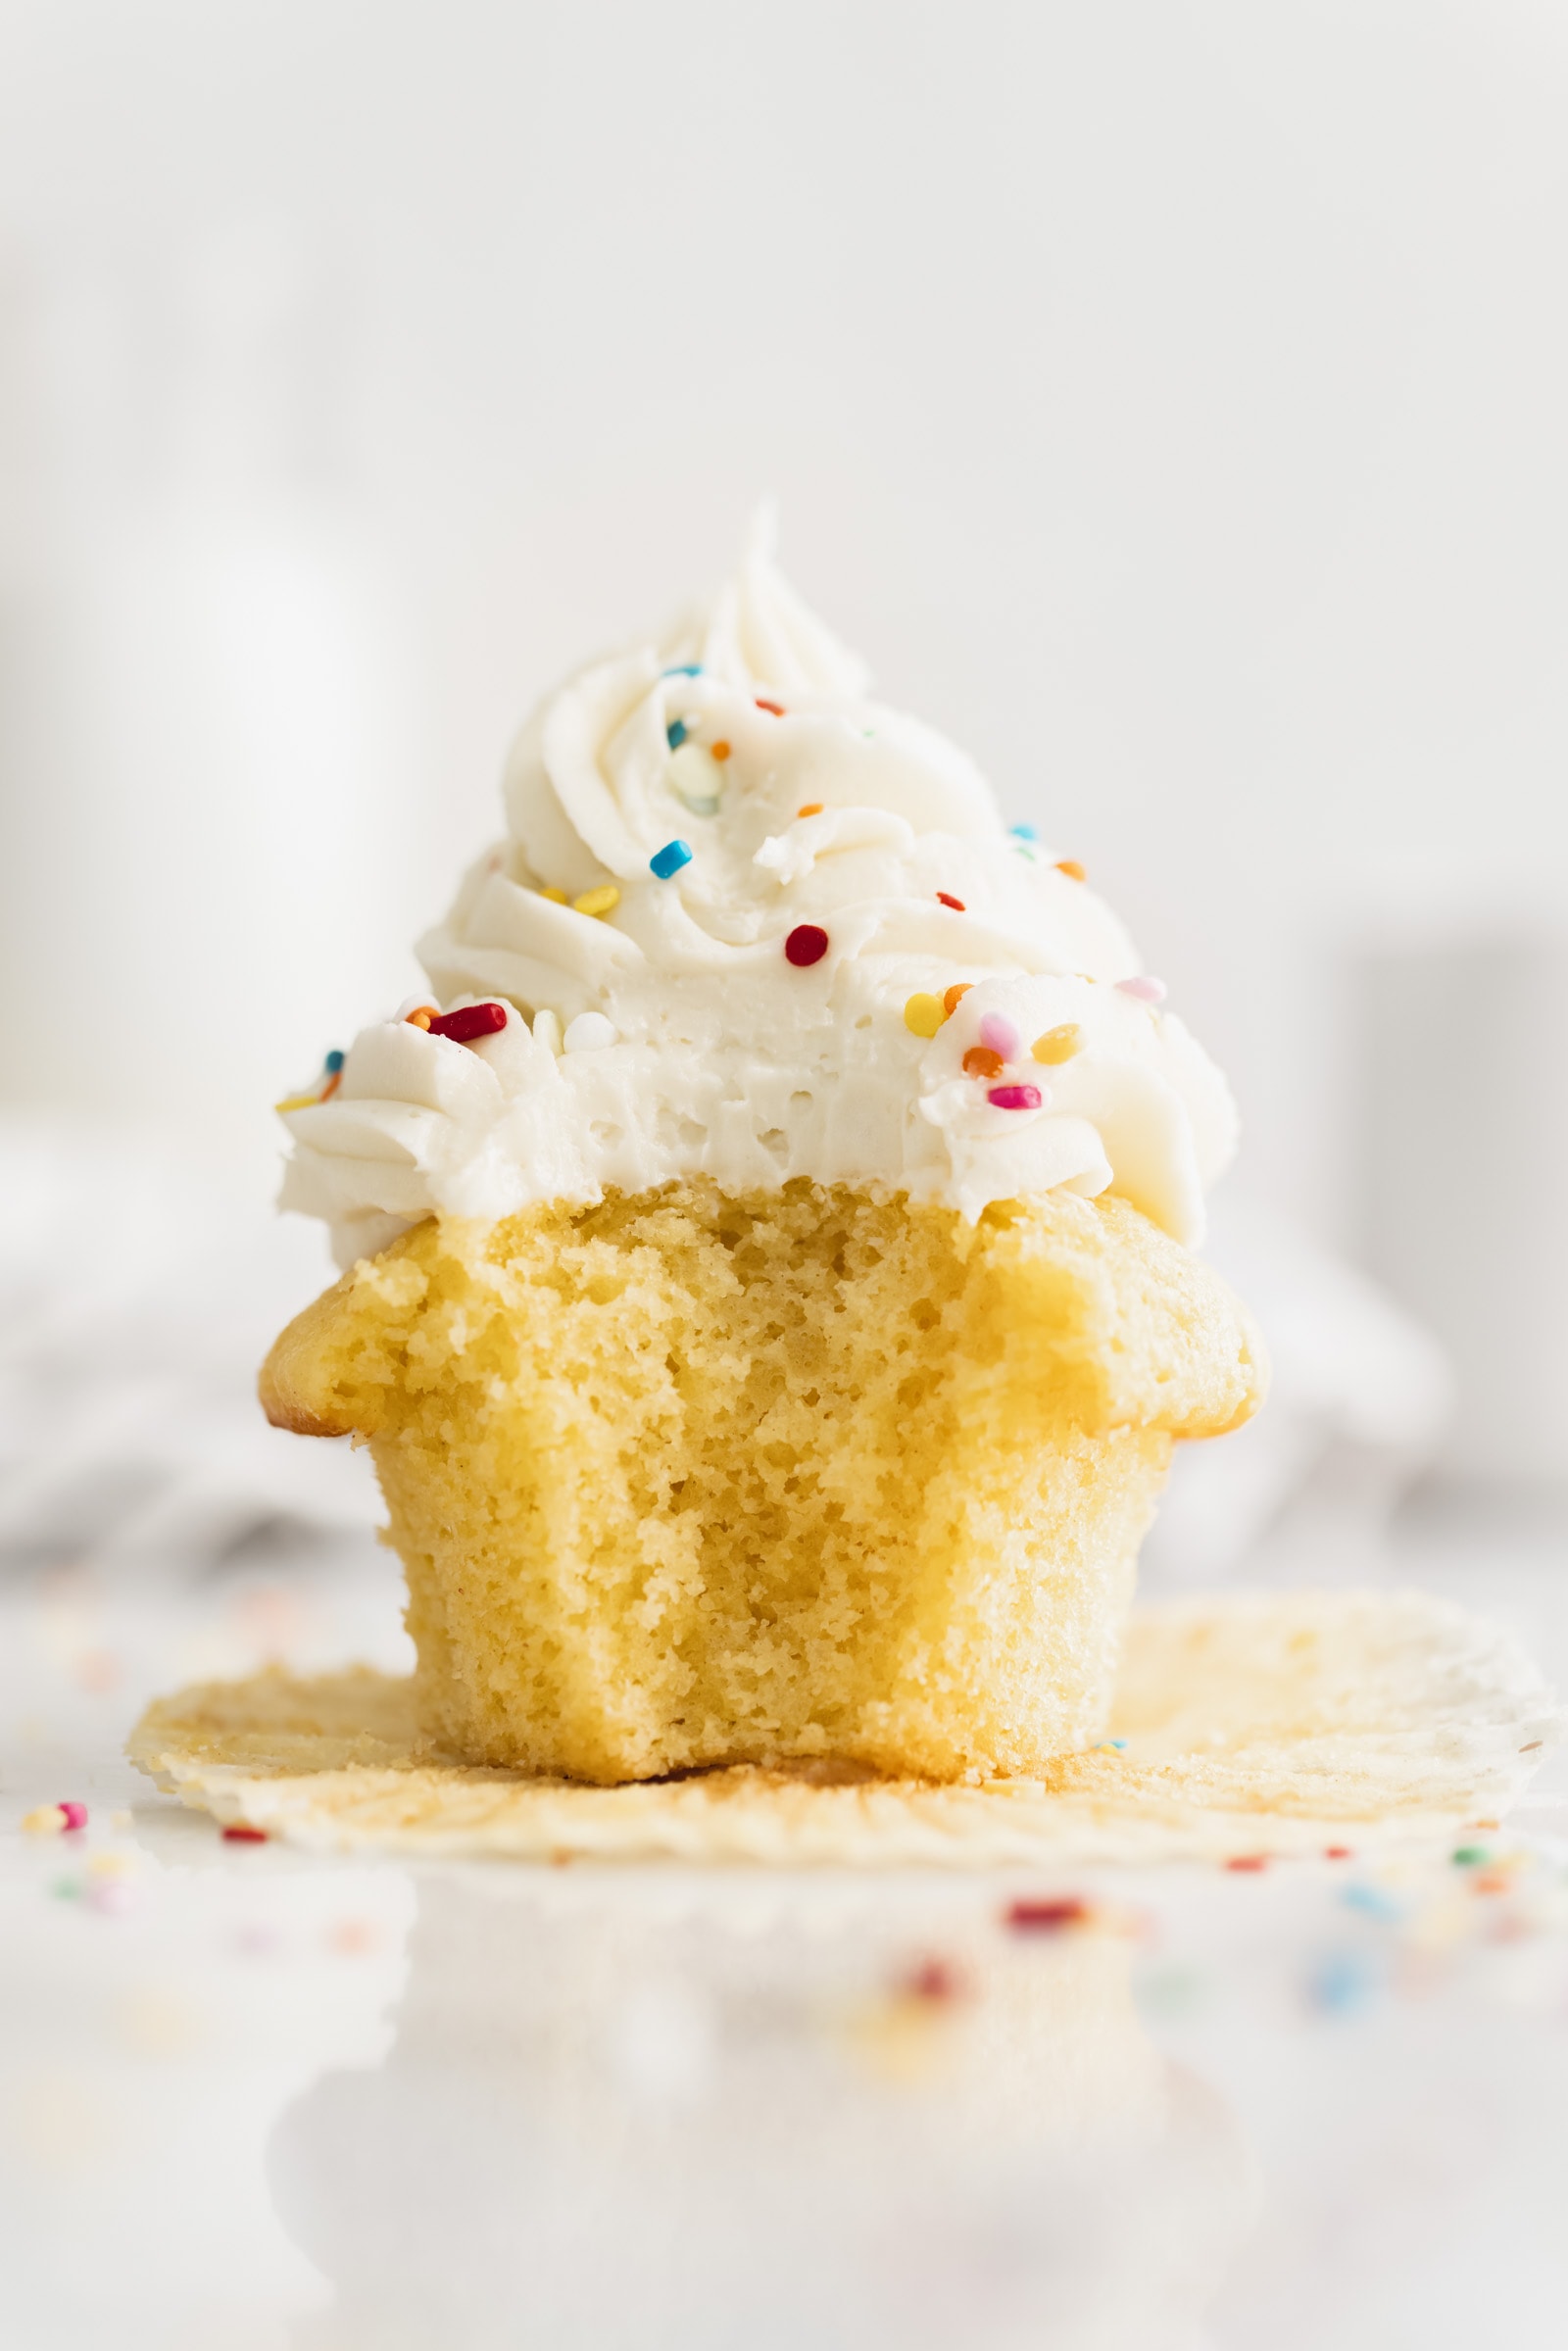 565+ Creative Cupcake Business Name Ideas for All Flavors with Sprinkles